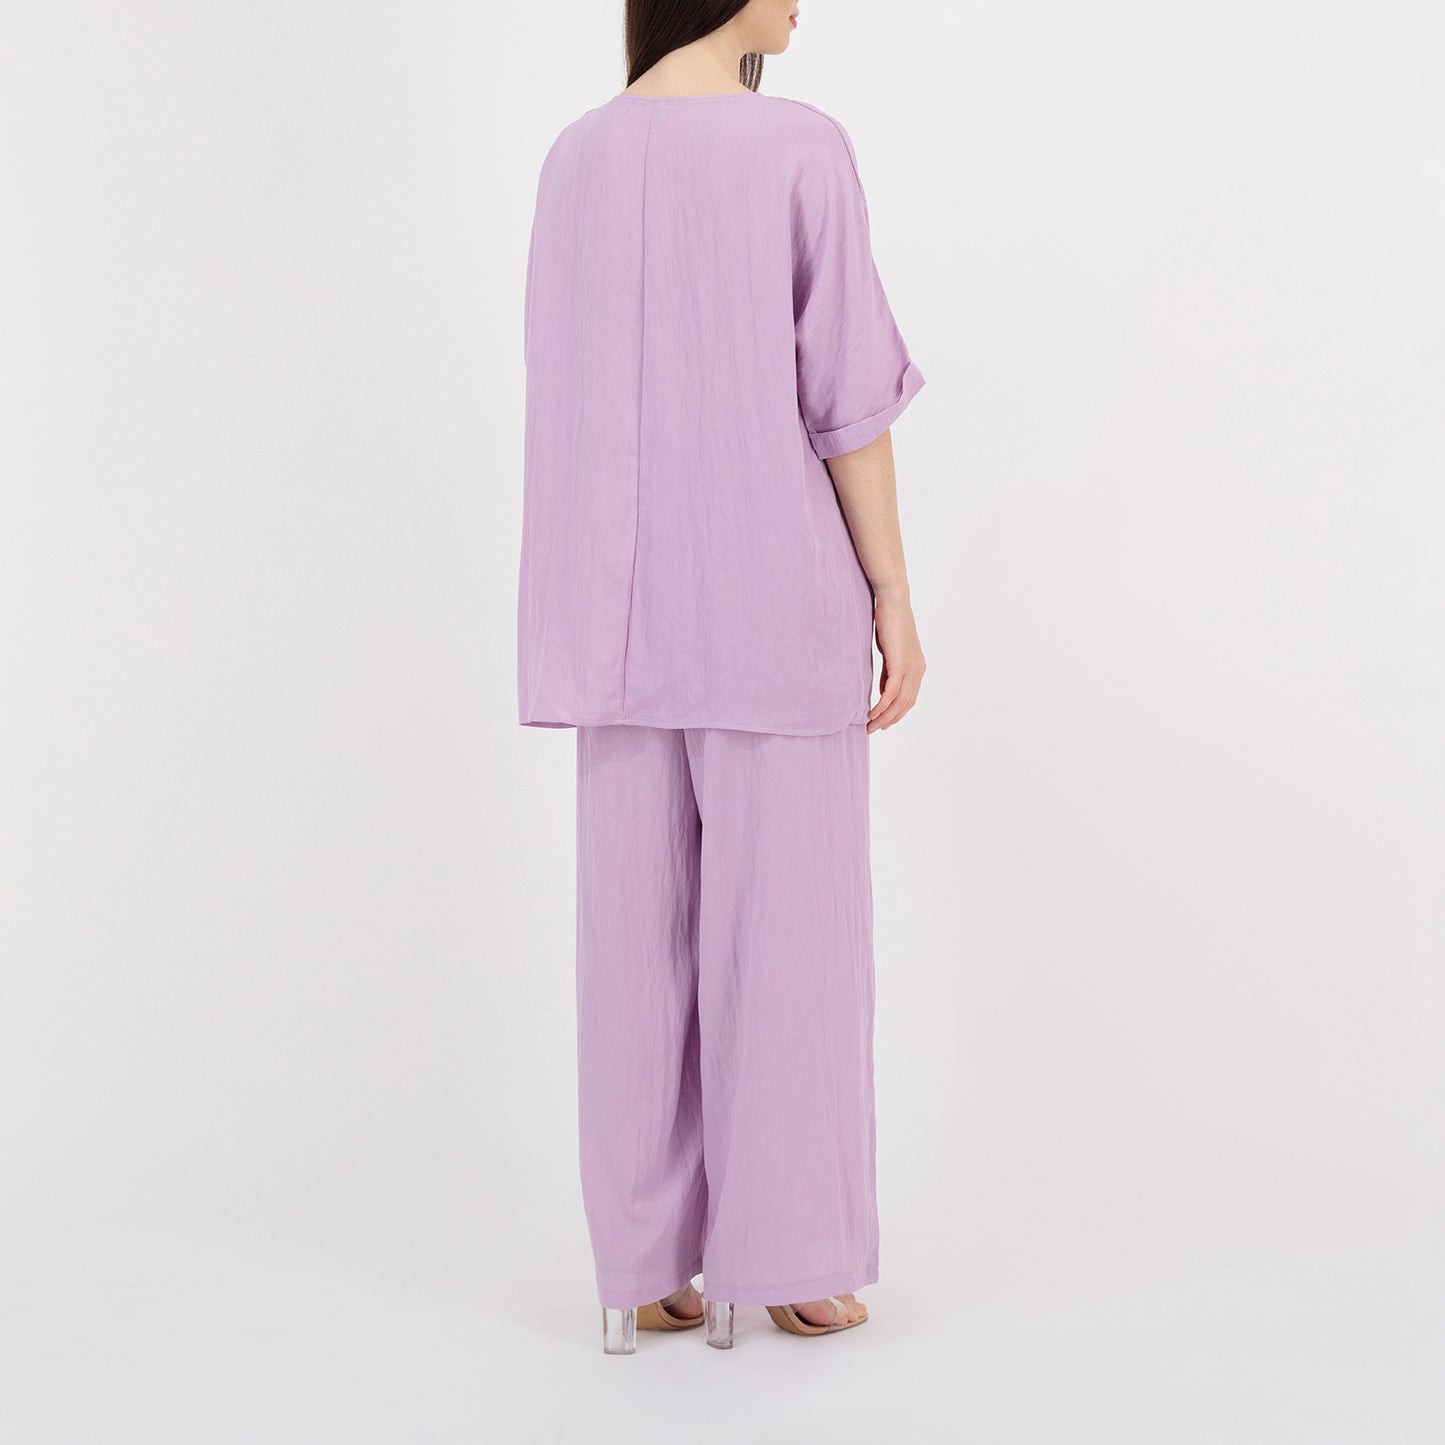 All Day Casual Set of 2 | Lavender Outfit